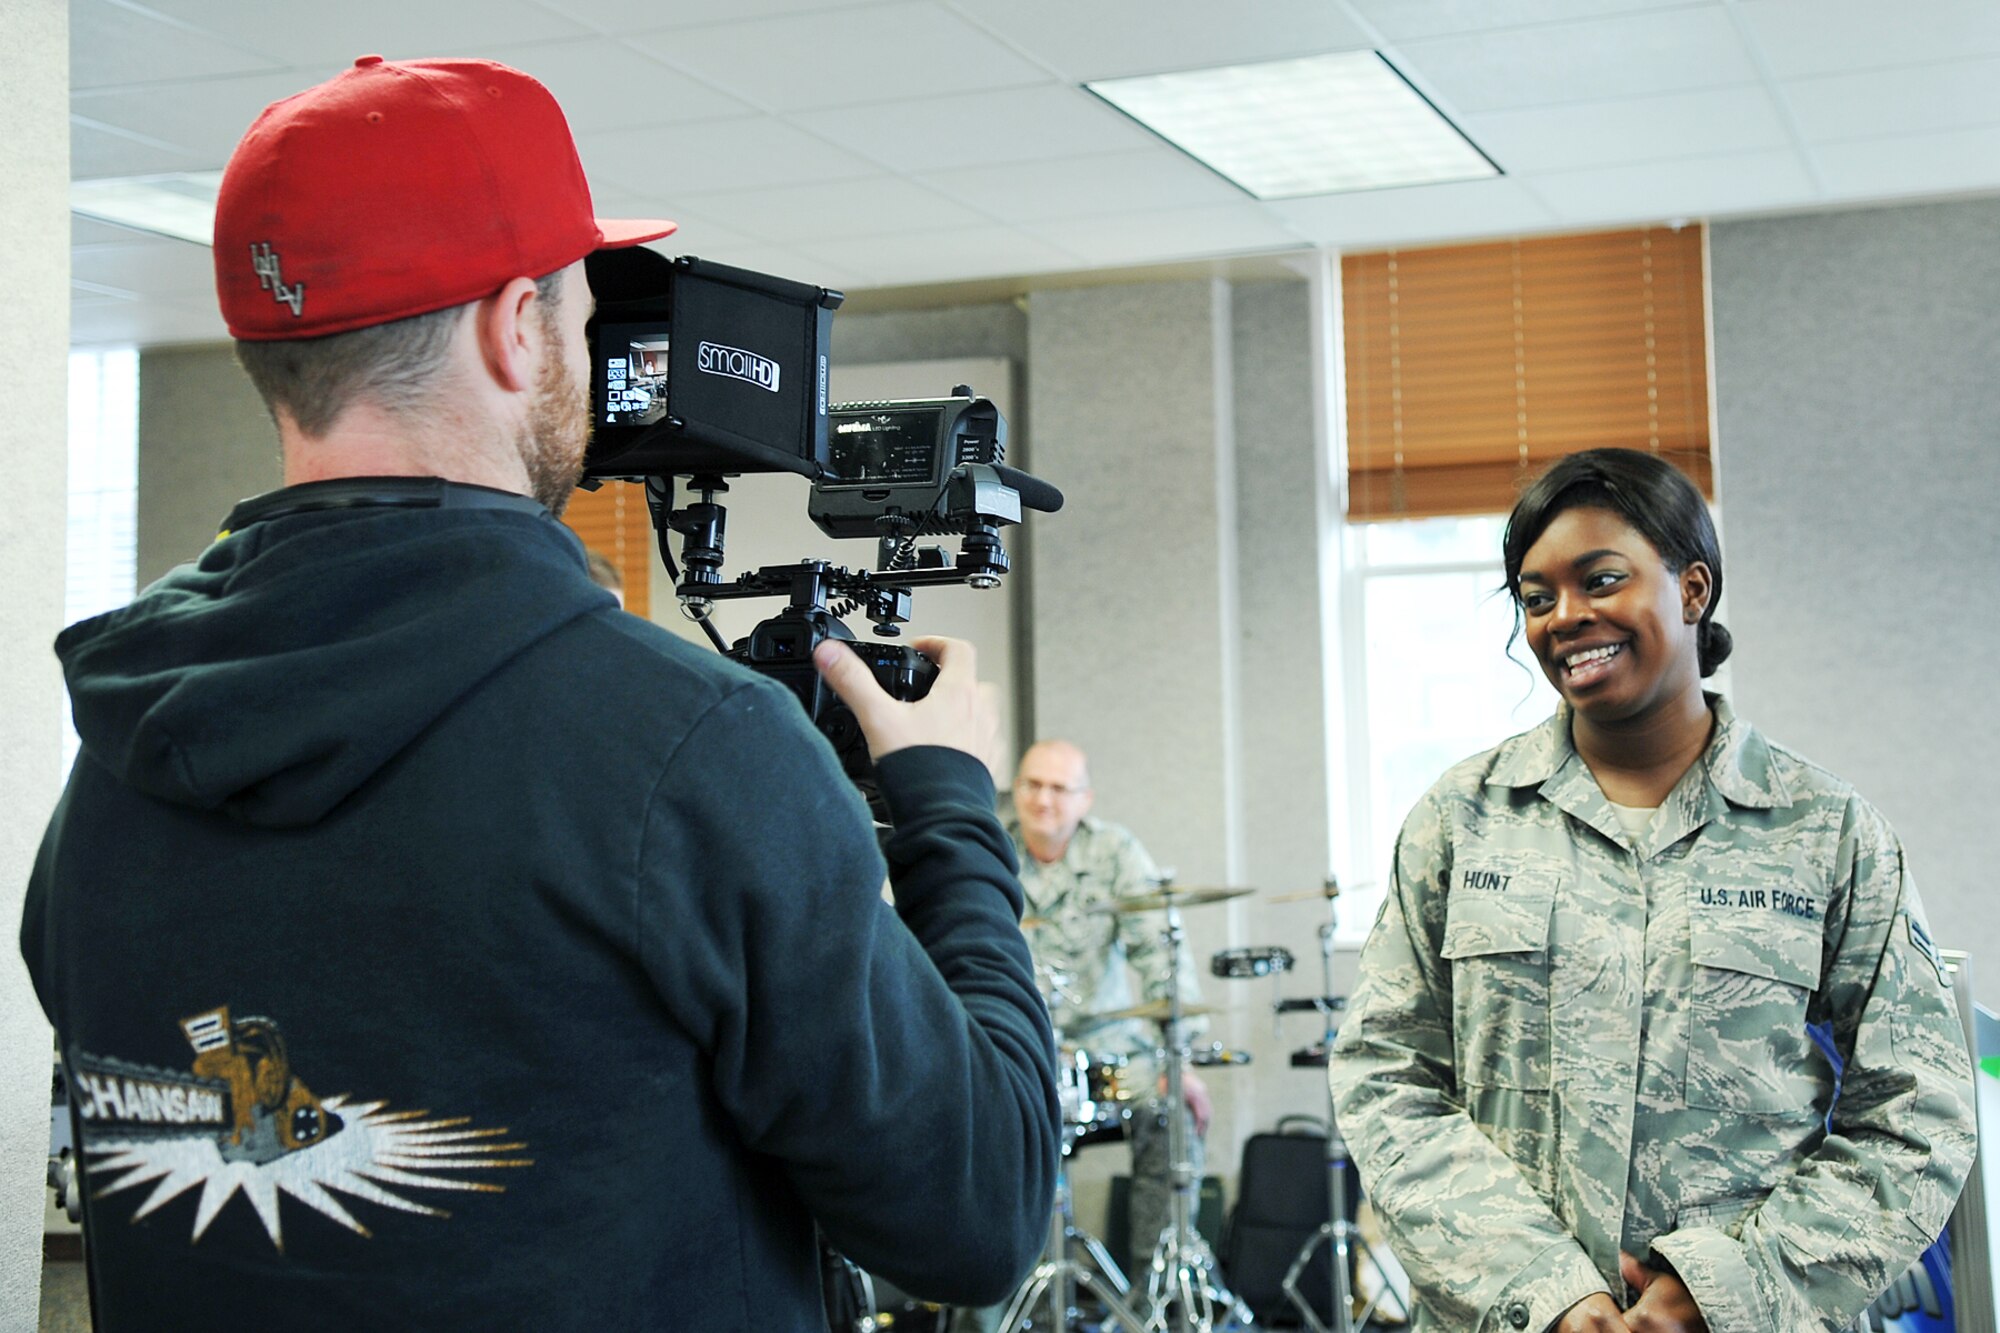 James Wright, a segment producer for American Idol, interviews Senior Airman Paula Hunt, a vocalist with the Heartland of America Band at Offutt Air Force Base, Neb., for the Omaha auditions episode of the show. Hunt appeared on the Jan. 30 episode of American Idol and received three yeses from the judges, ensuring her a ticket to Hollywood Week. (Photo by Charles Haymond) 